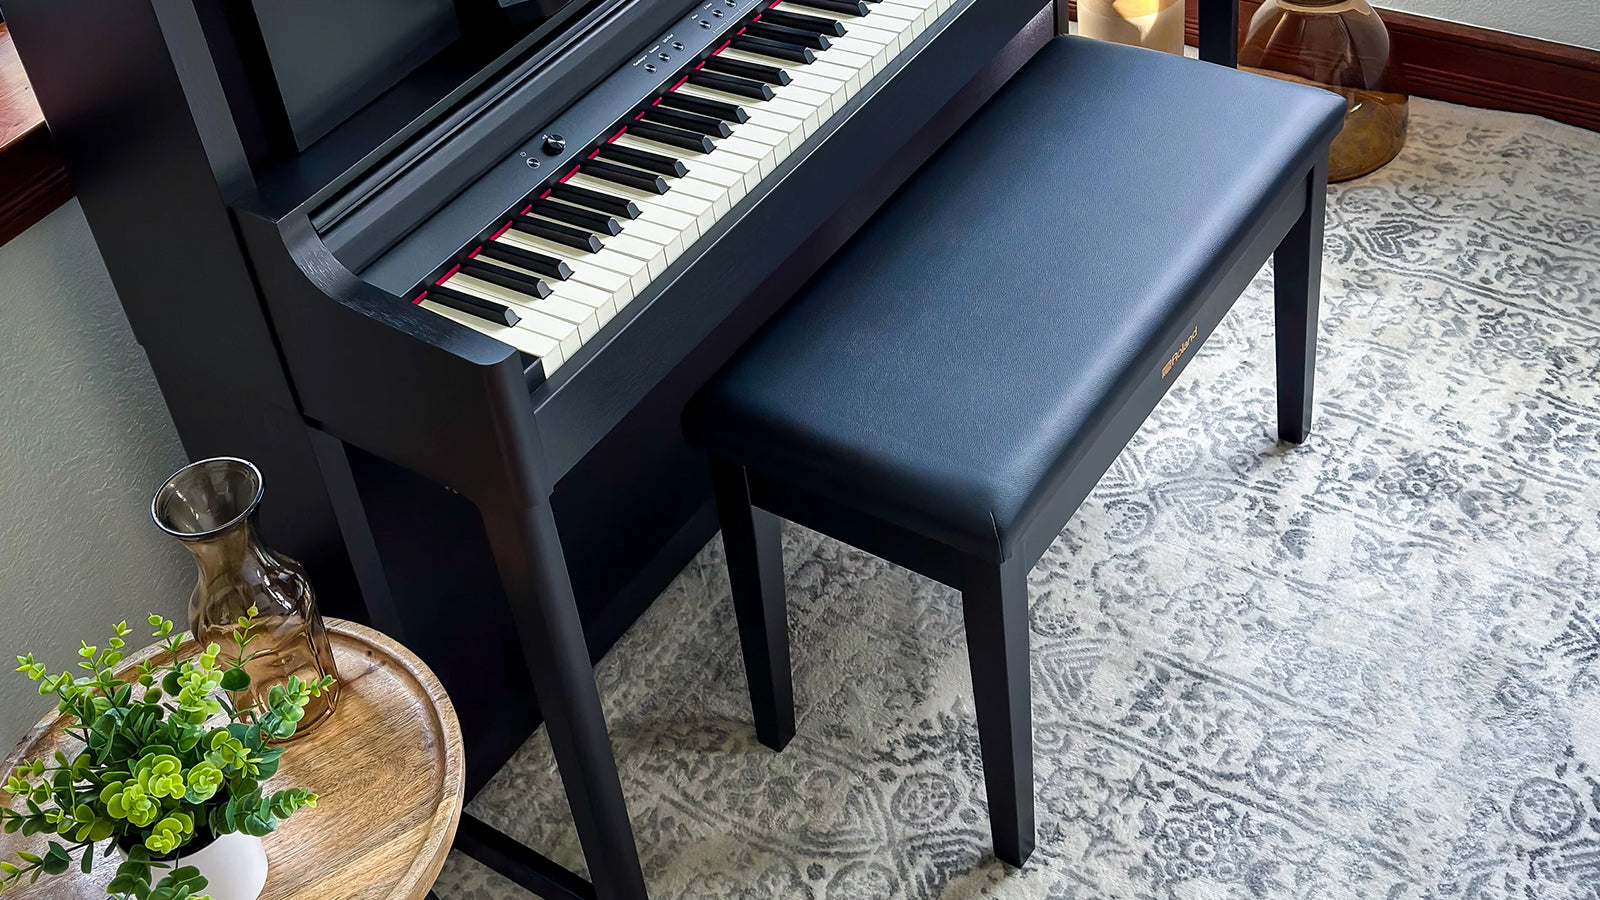 Close up of a Roland piano bench